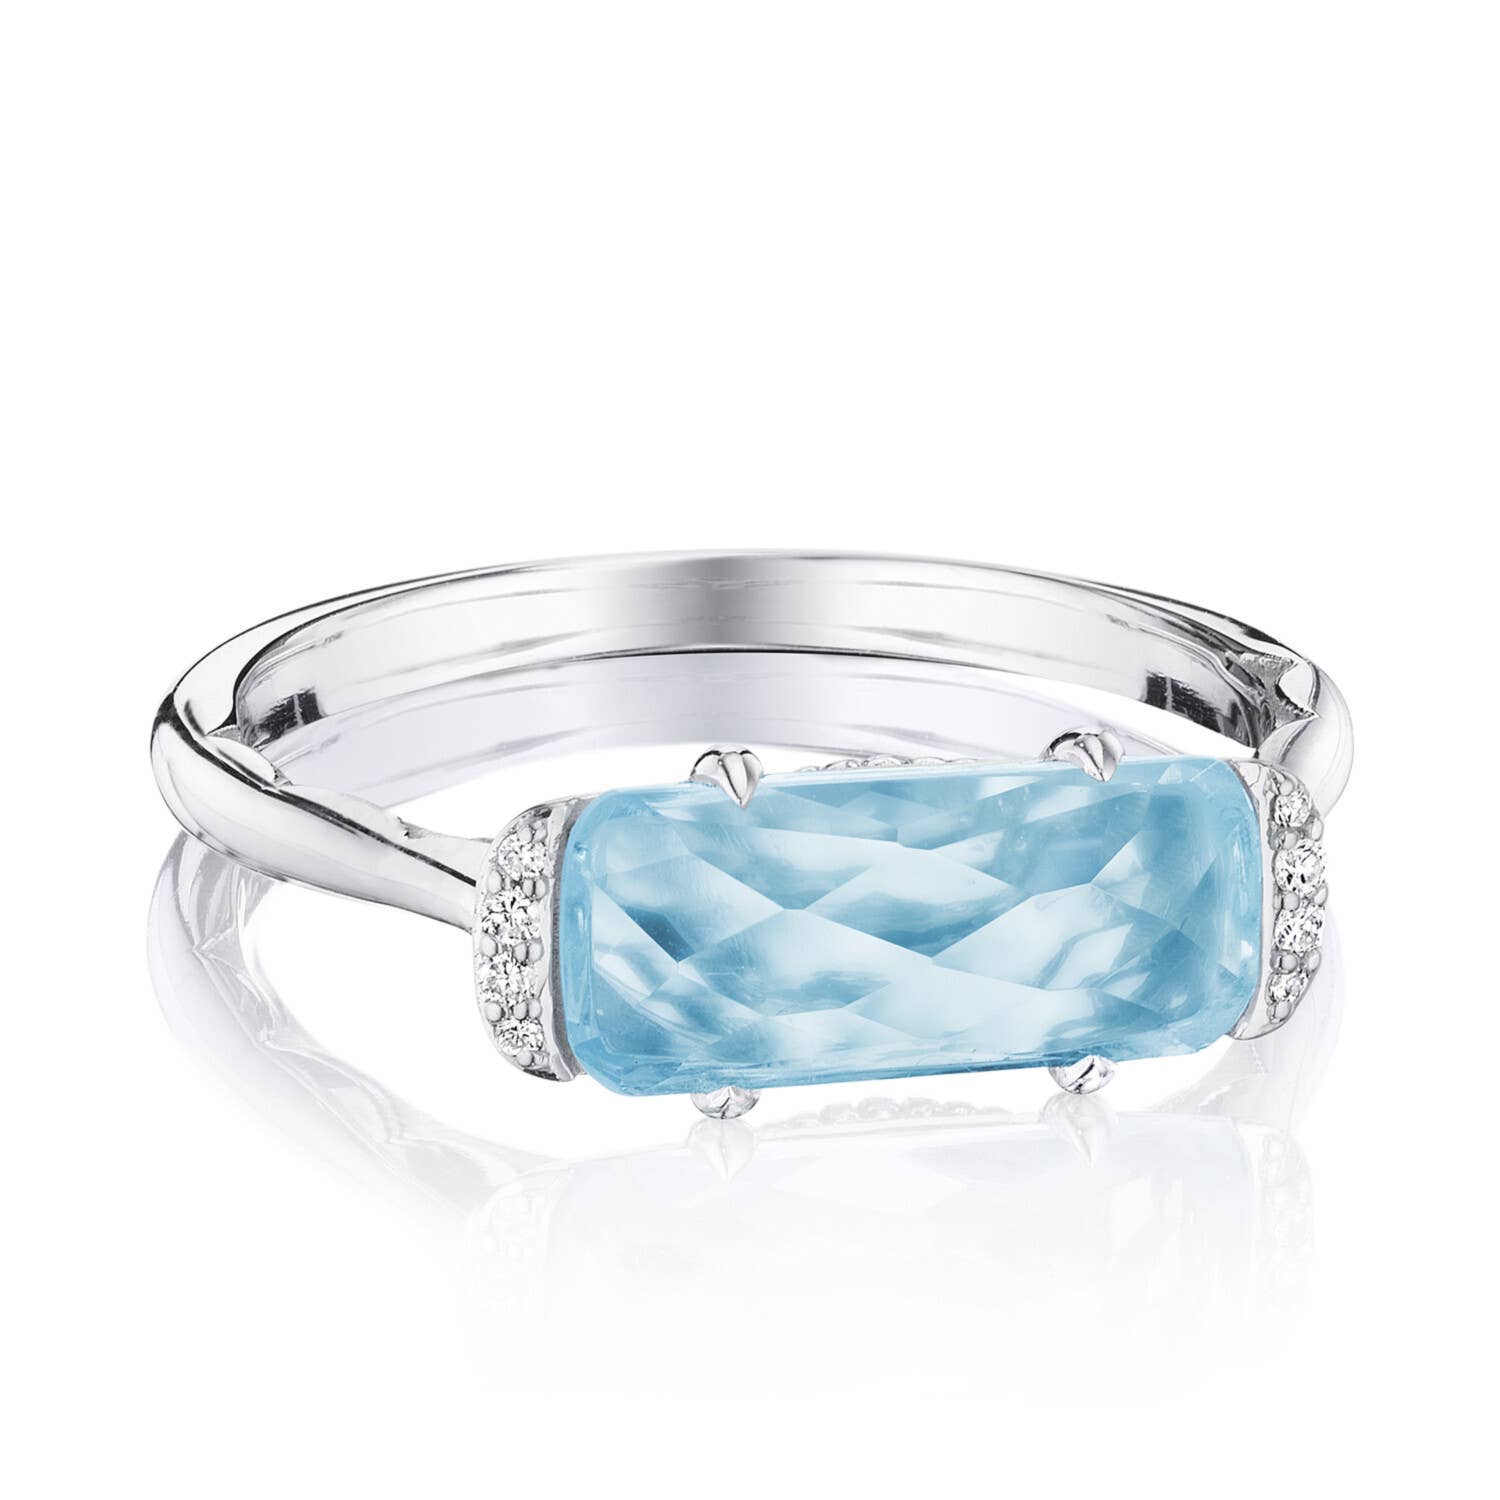 Solitaire Emerald Cut Ring with Sky Blue Topaz